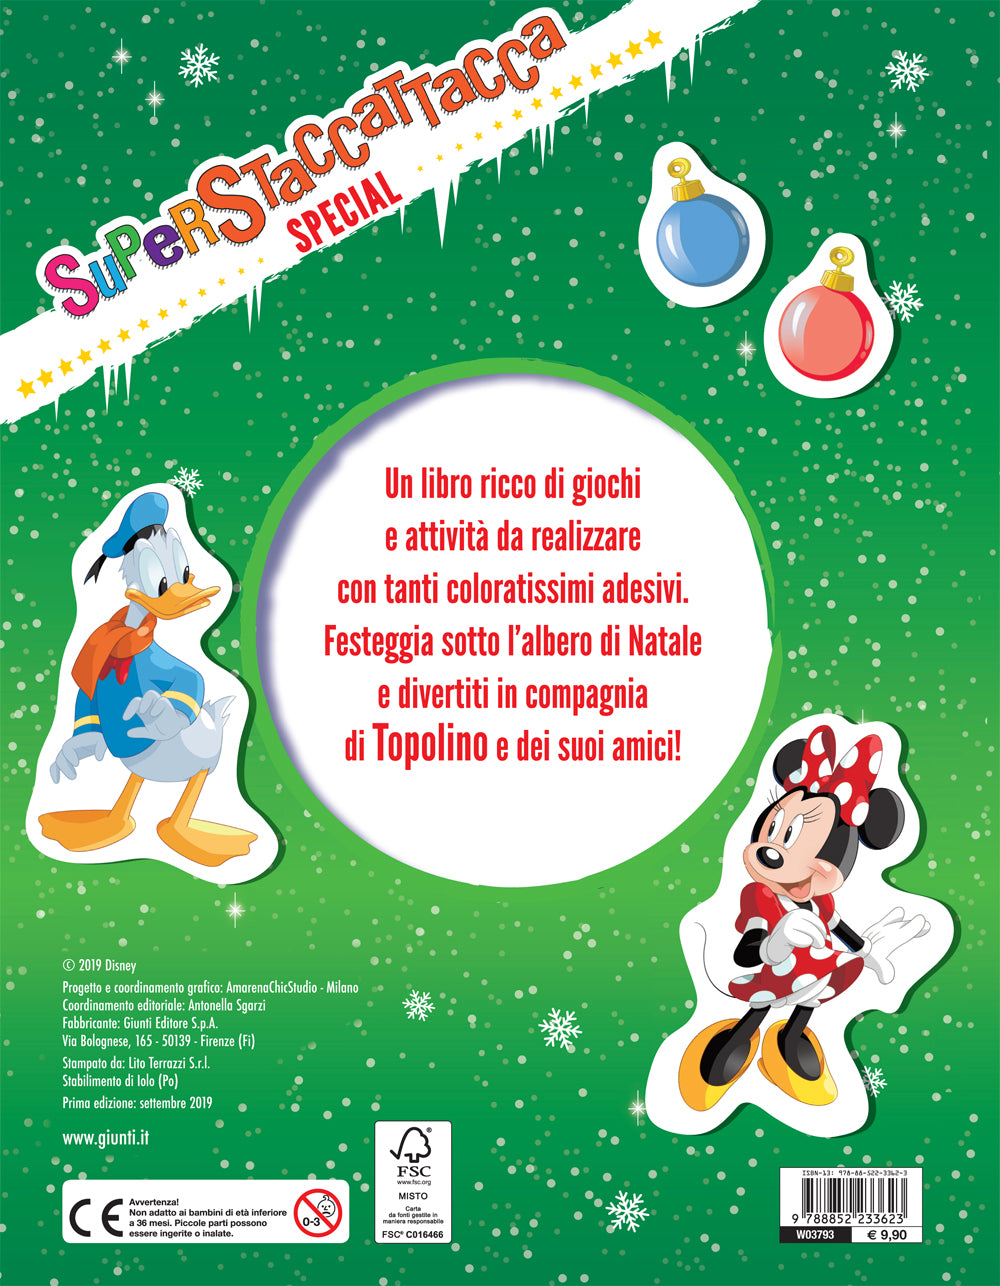 Superstaccattacca Special - Natale